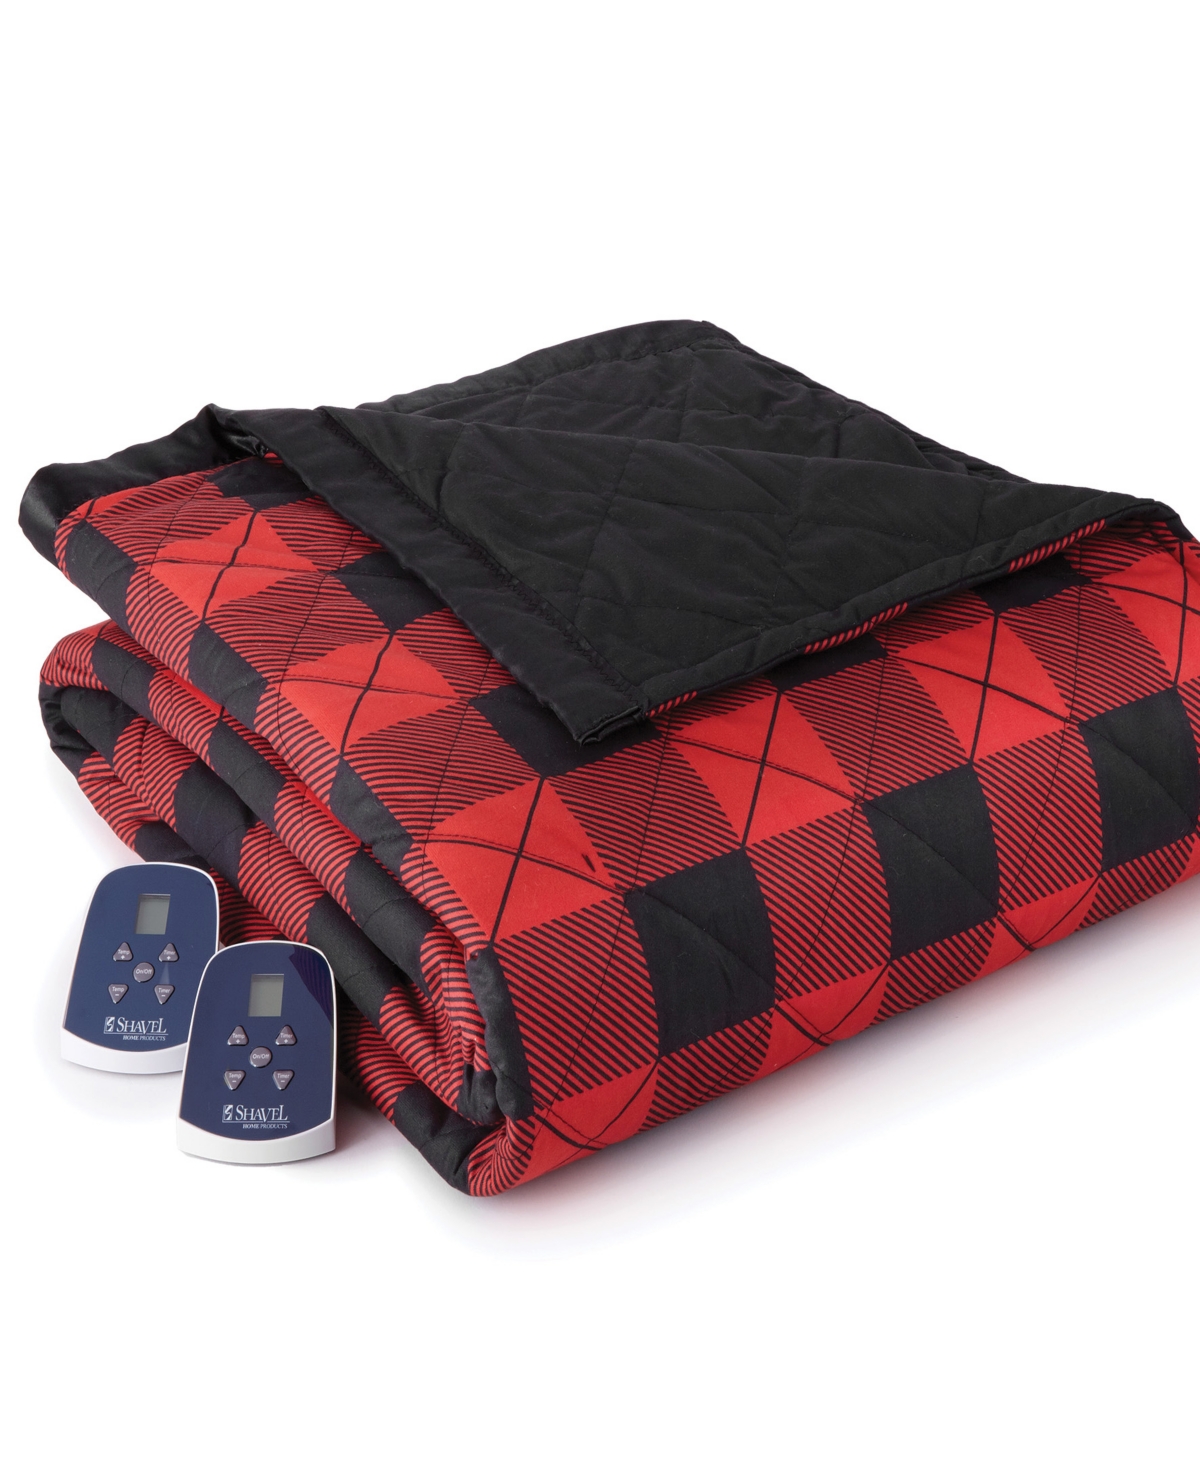 Shavel Micro Flannel 7 Layers Of Warmth King Electric Blanket In Buffalo Check Red